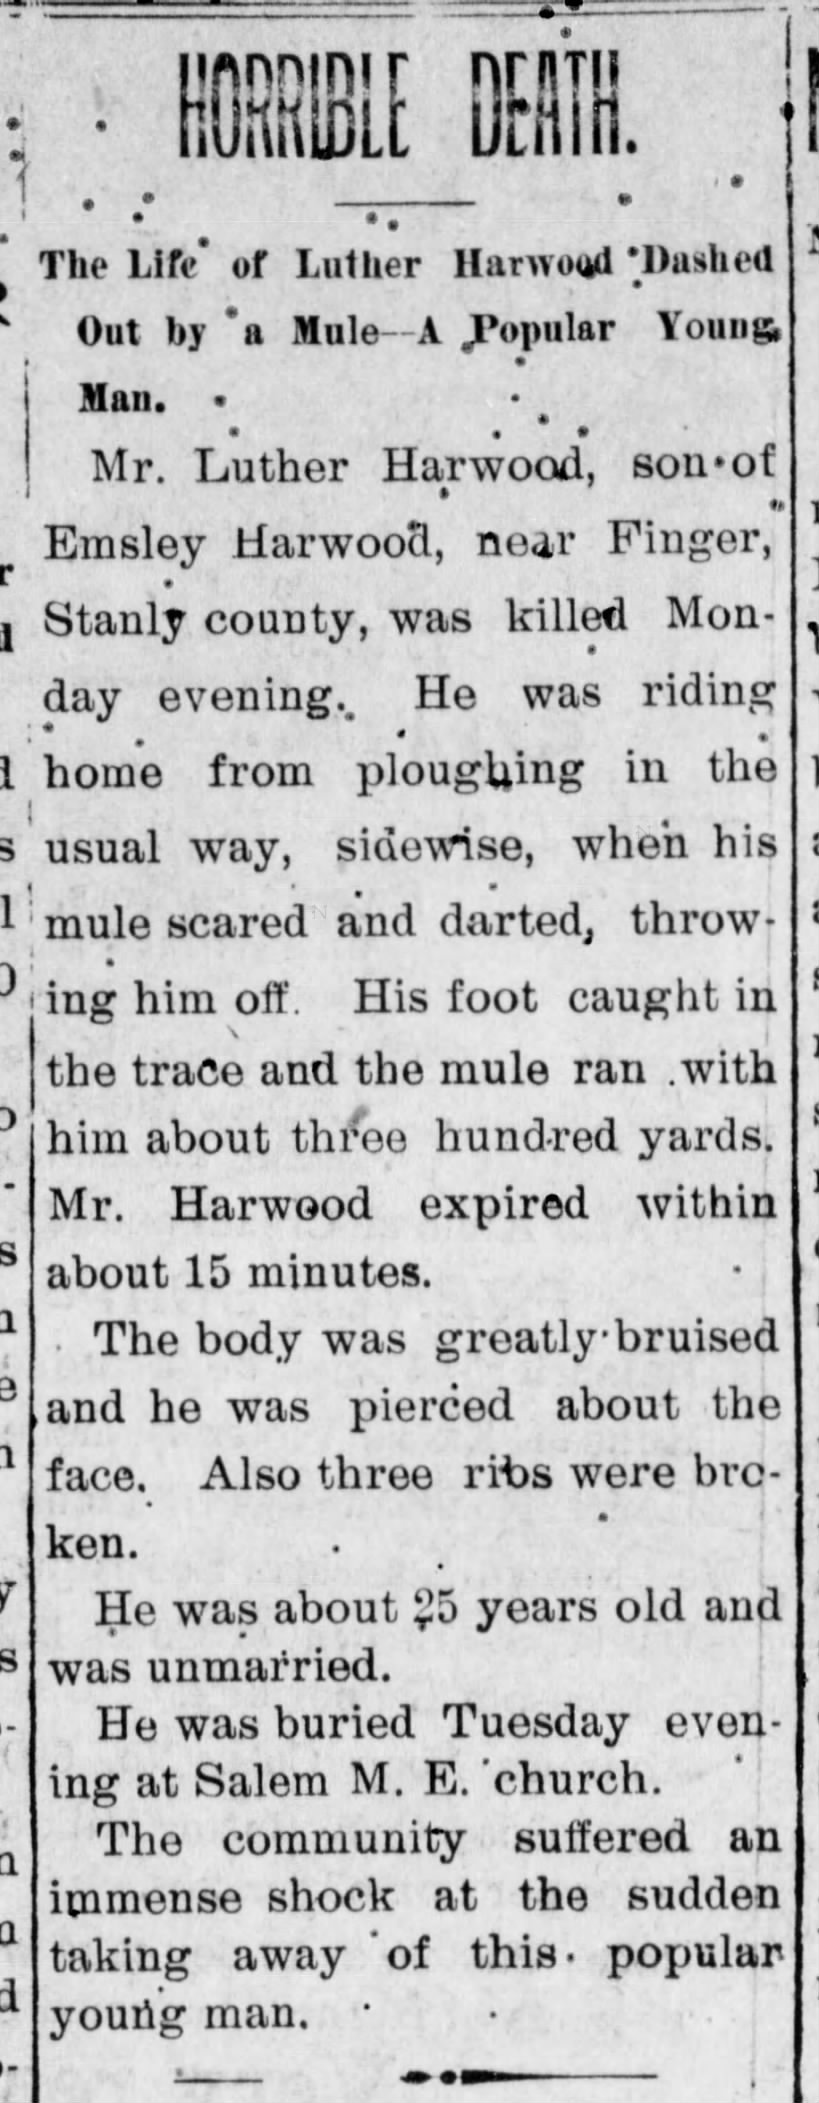 Thursday, August 16, 1900
Daily Concord Standard